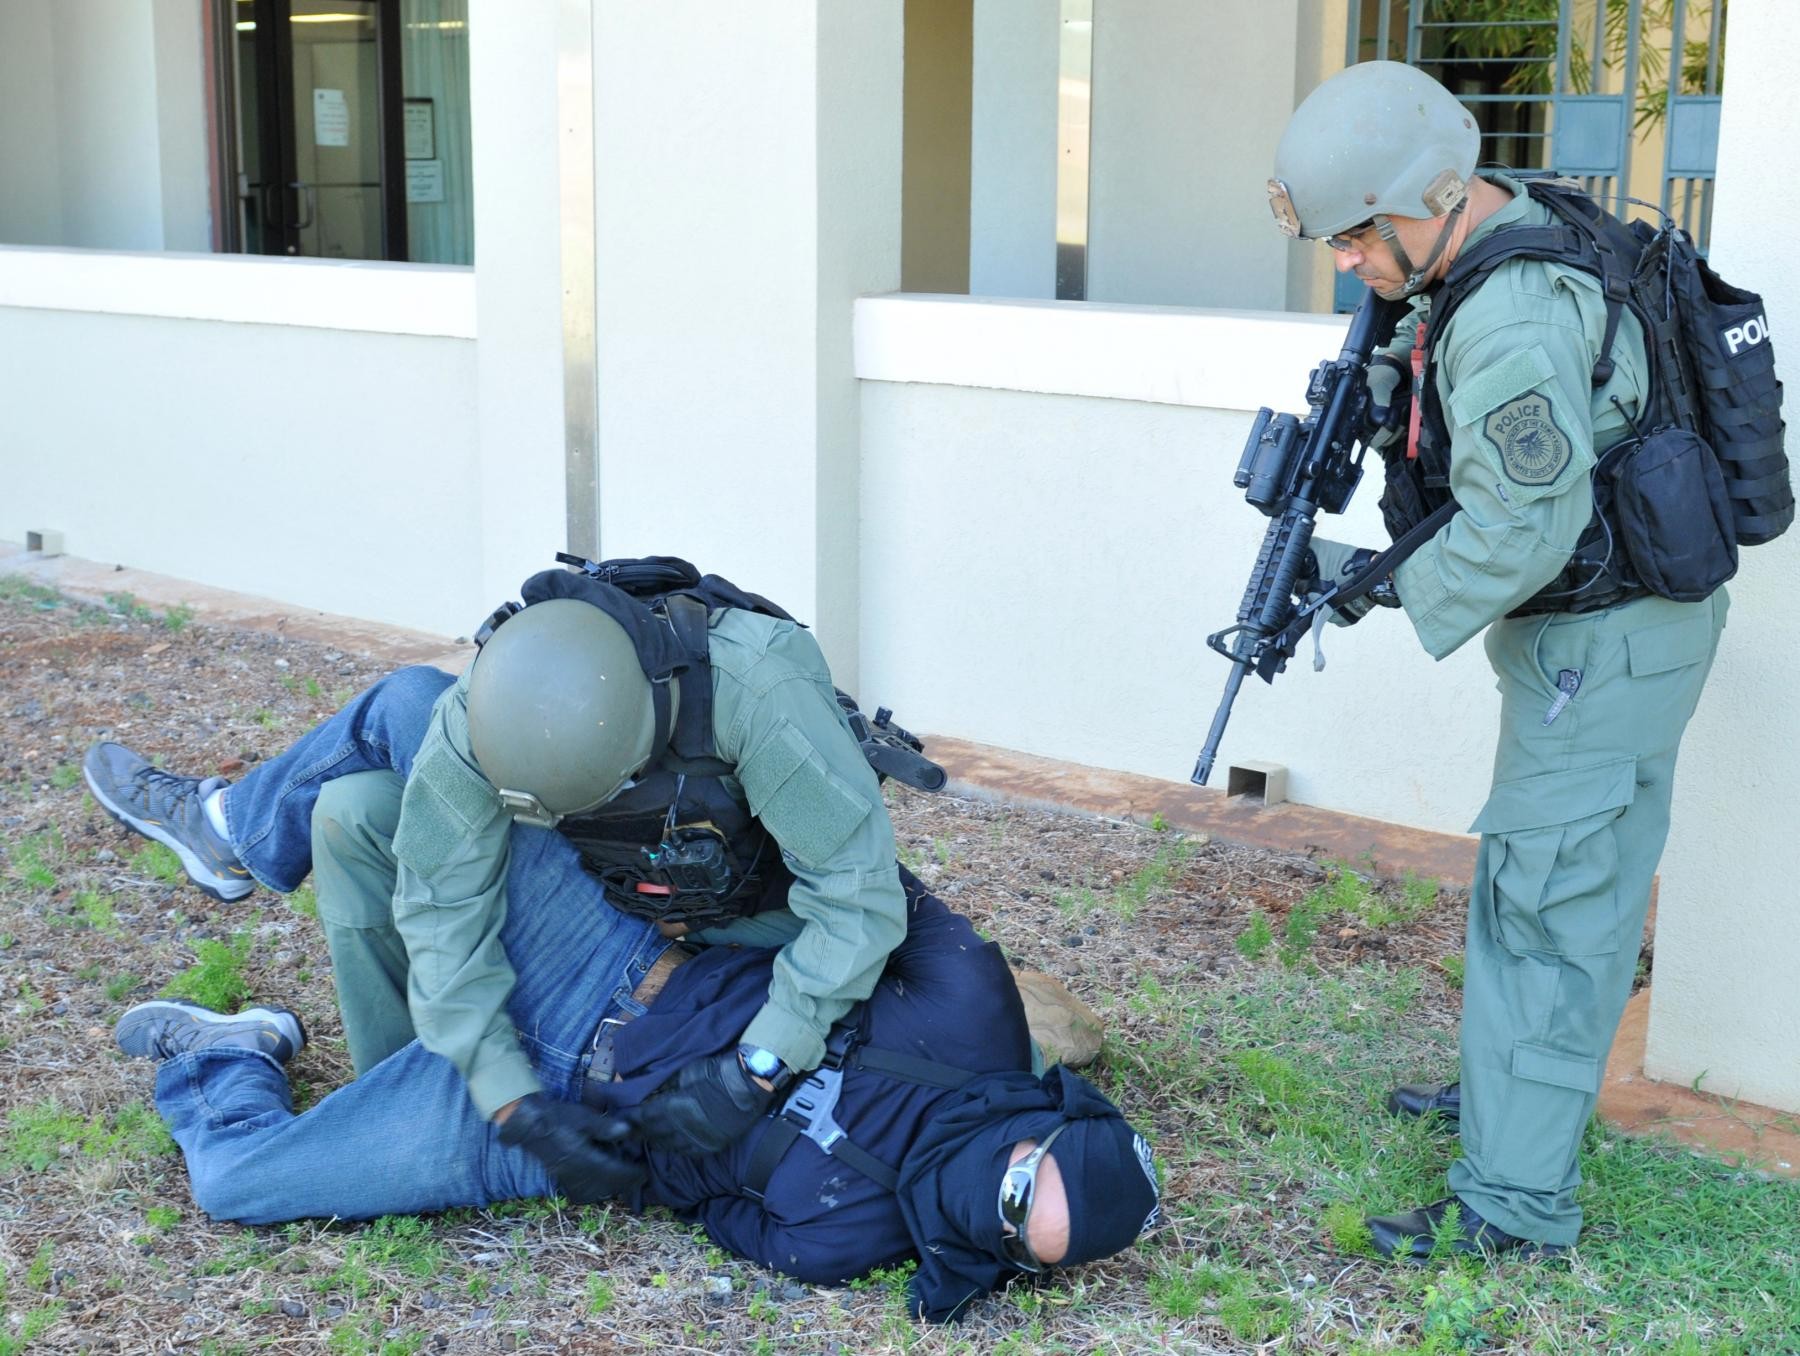 Special Reaction Team trains on antiterrorism | Article | The United States Army